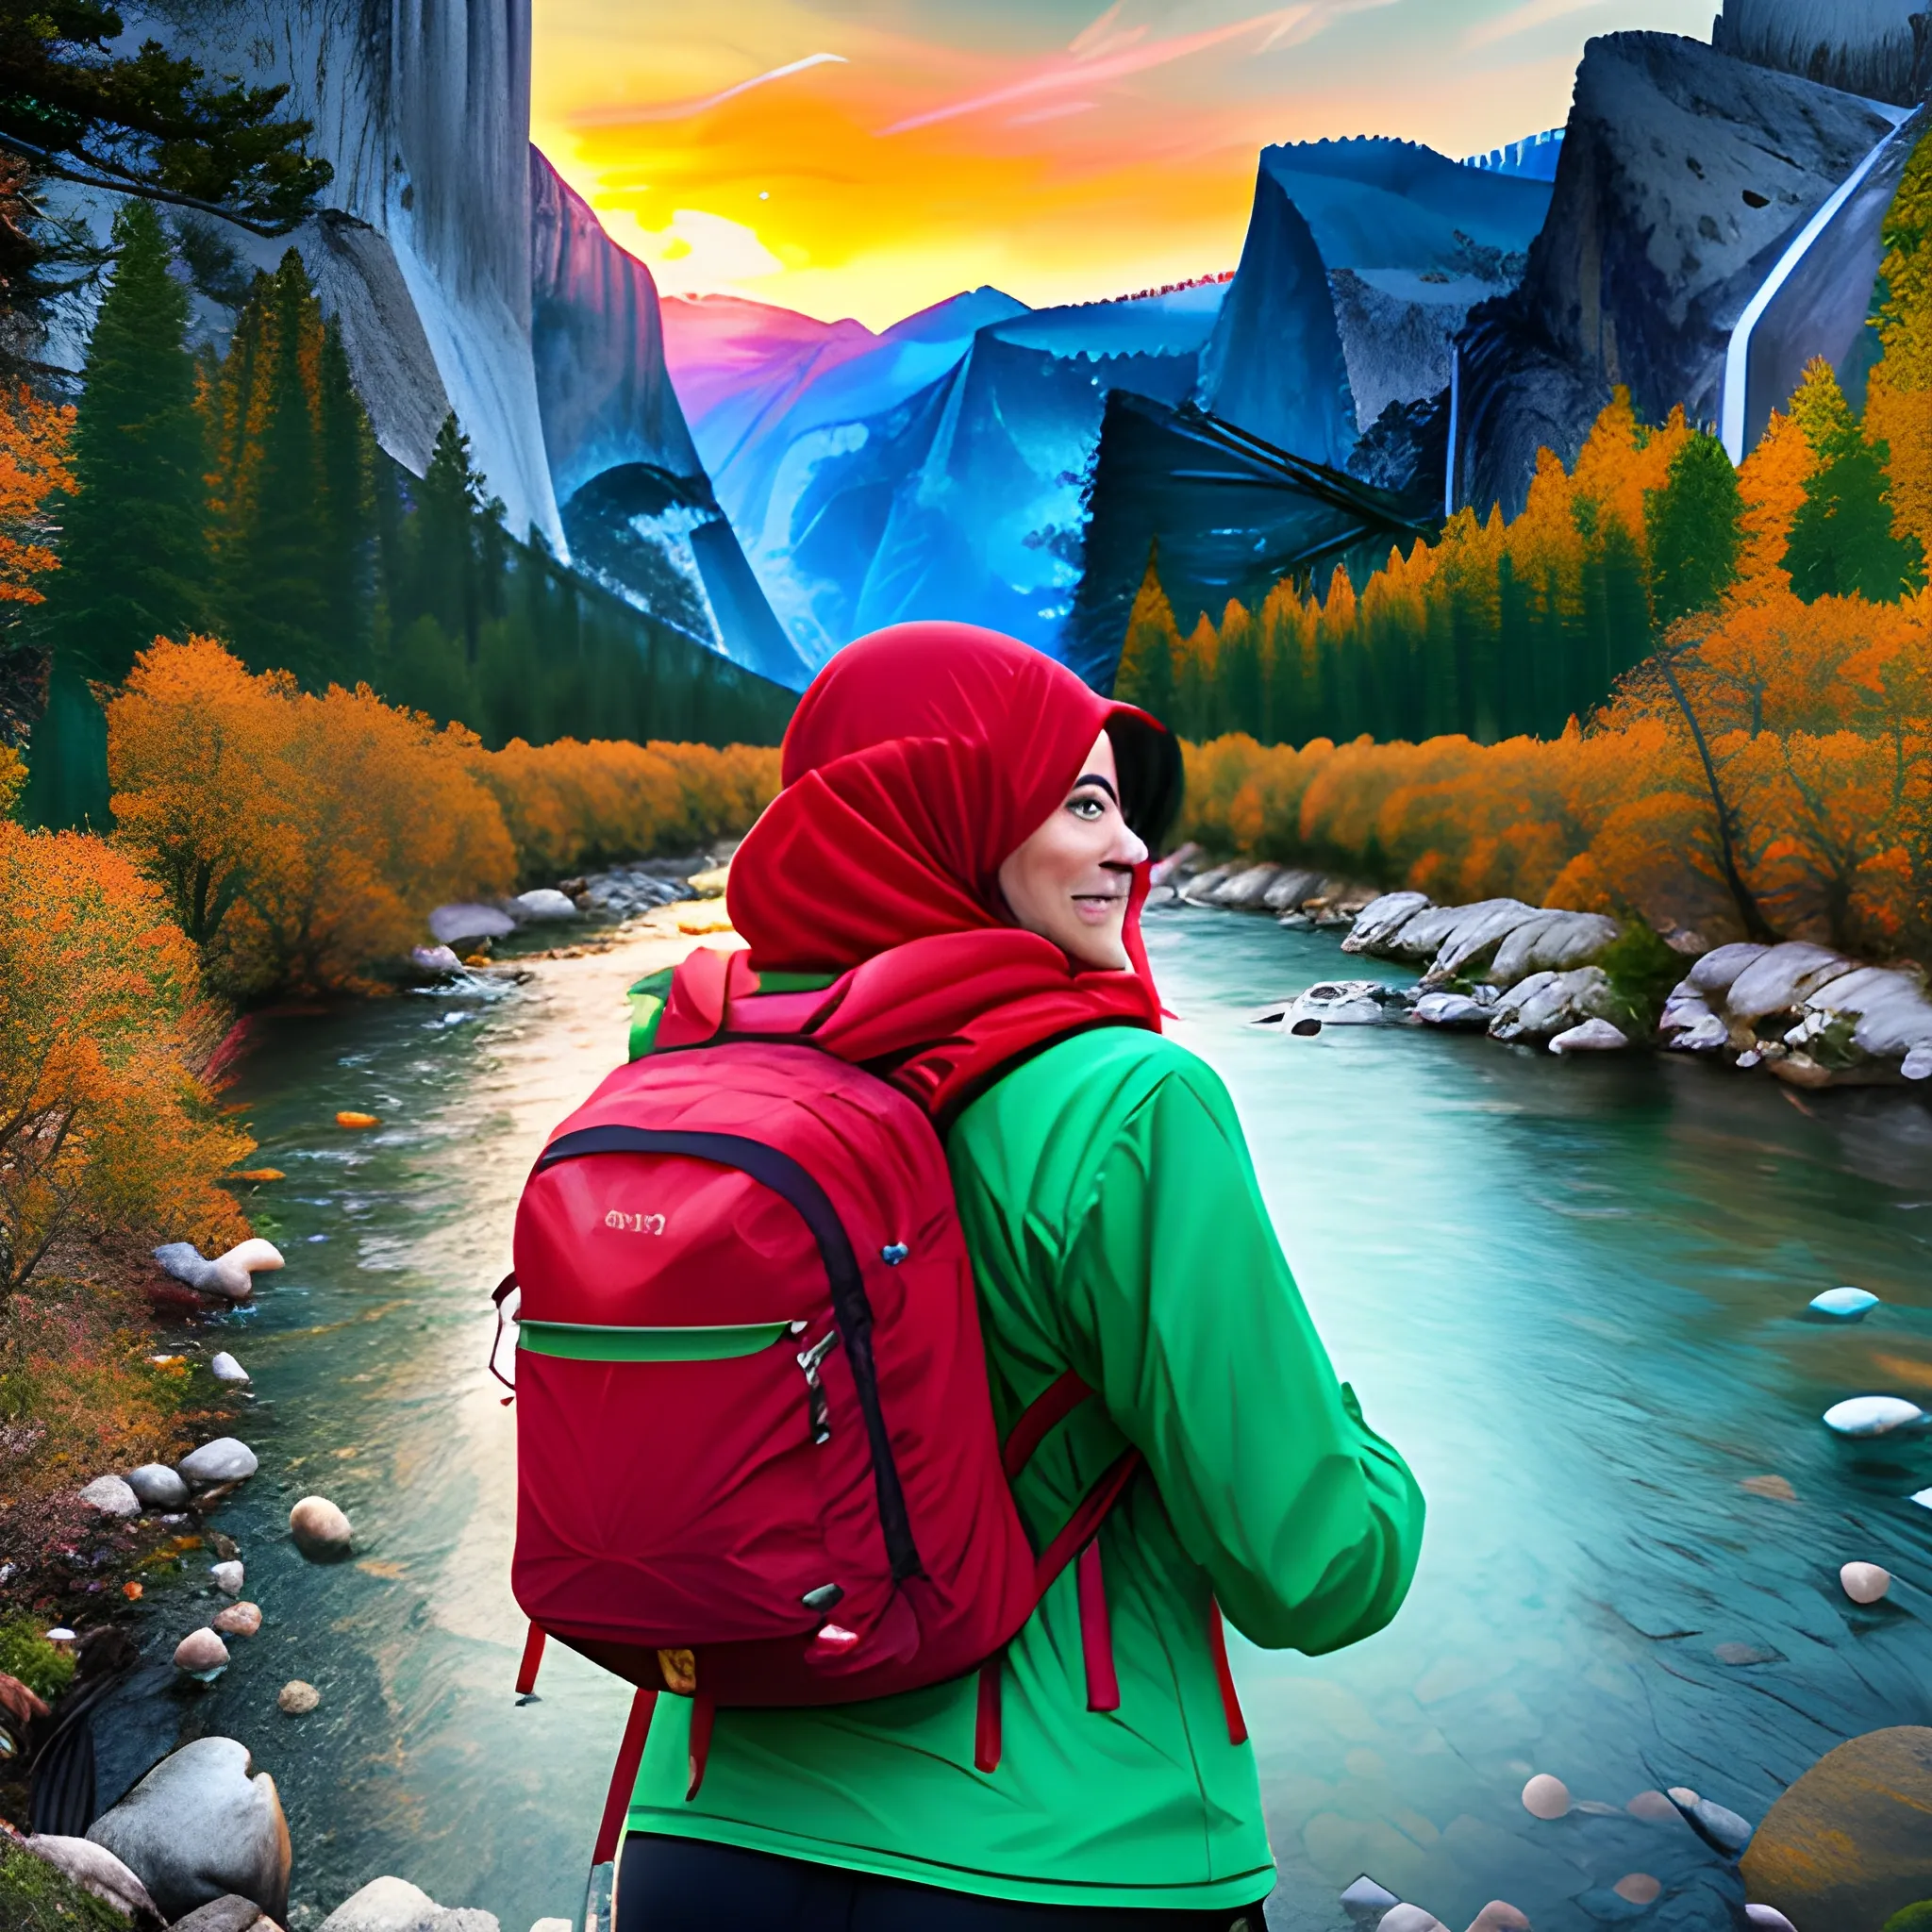 Photo of nice girl with a green scarf in the Paradise, background view is a sunrise above clouds with glorious colours, like the pristine scenery of nature, smiling, (yosemite:1.3), a backpack, red top, hiking jacket, rocks, river, wood, analog style (look at viewer:1.2) (skin texture), close up, sidelighting, Fujiflim XT3, DSLR, 50mm, Water Color